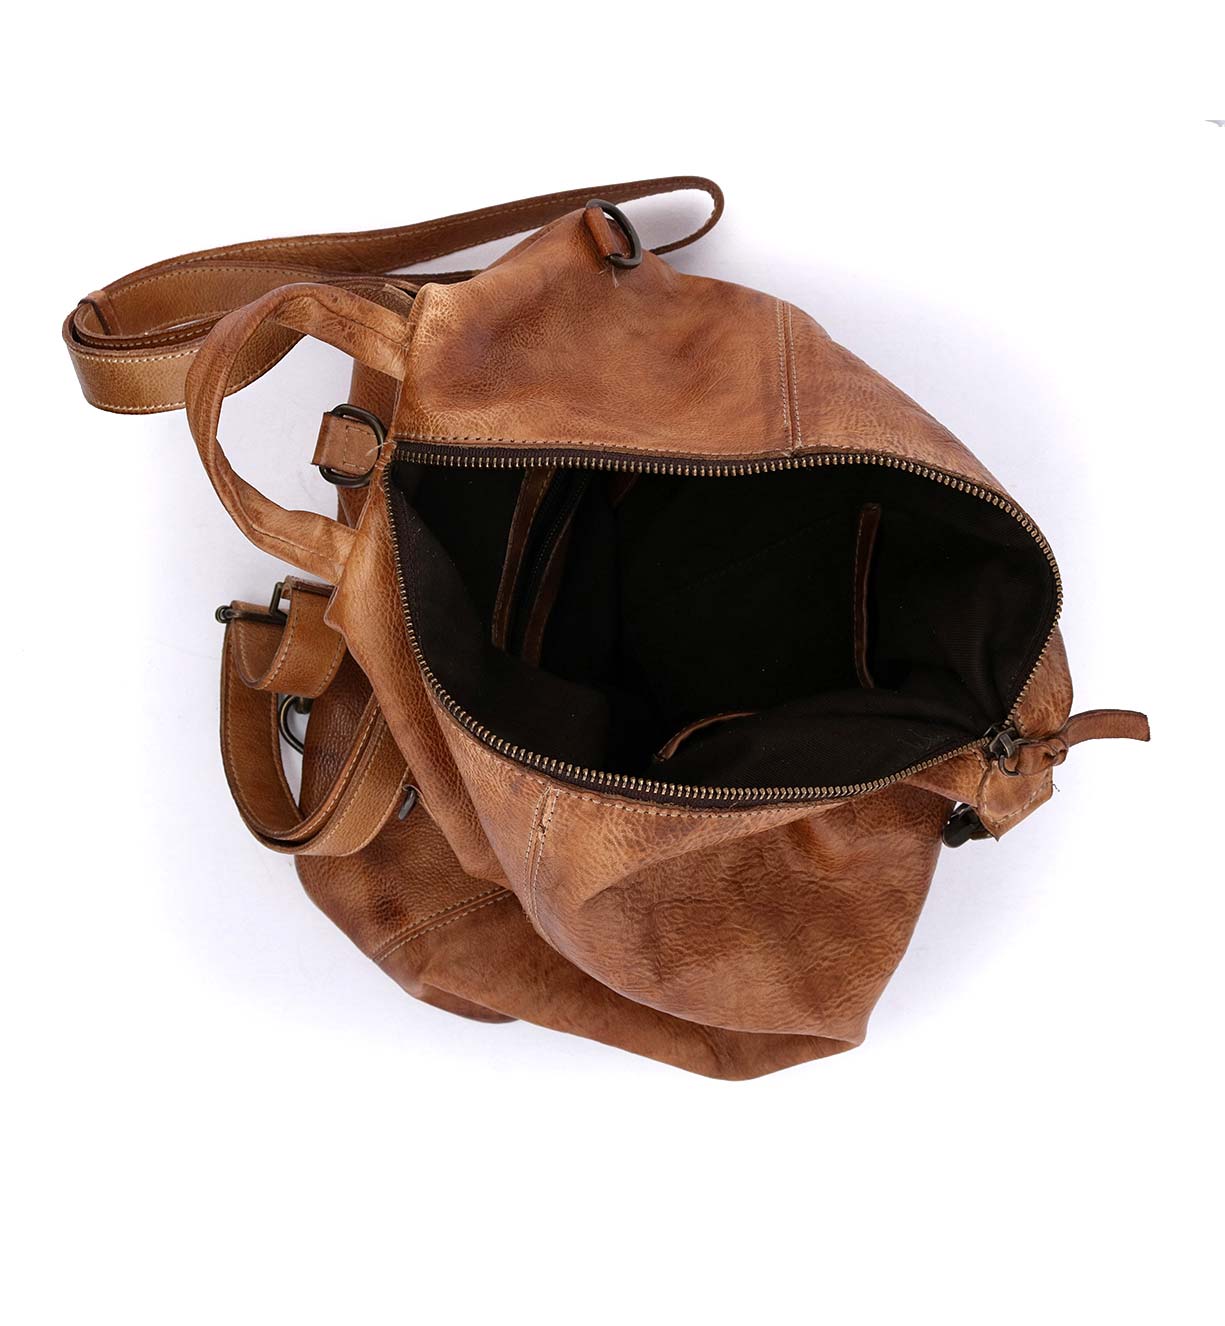 A Delta brand Bed Stu brown leather bag with a zippered compartment.